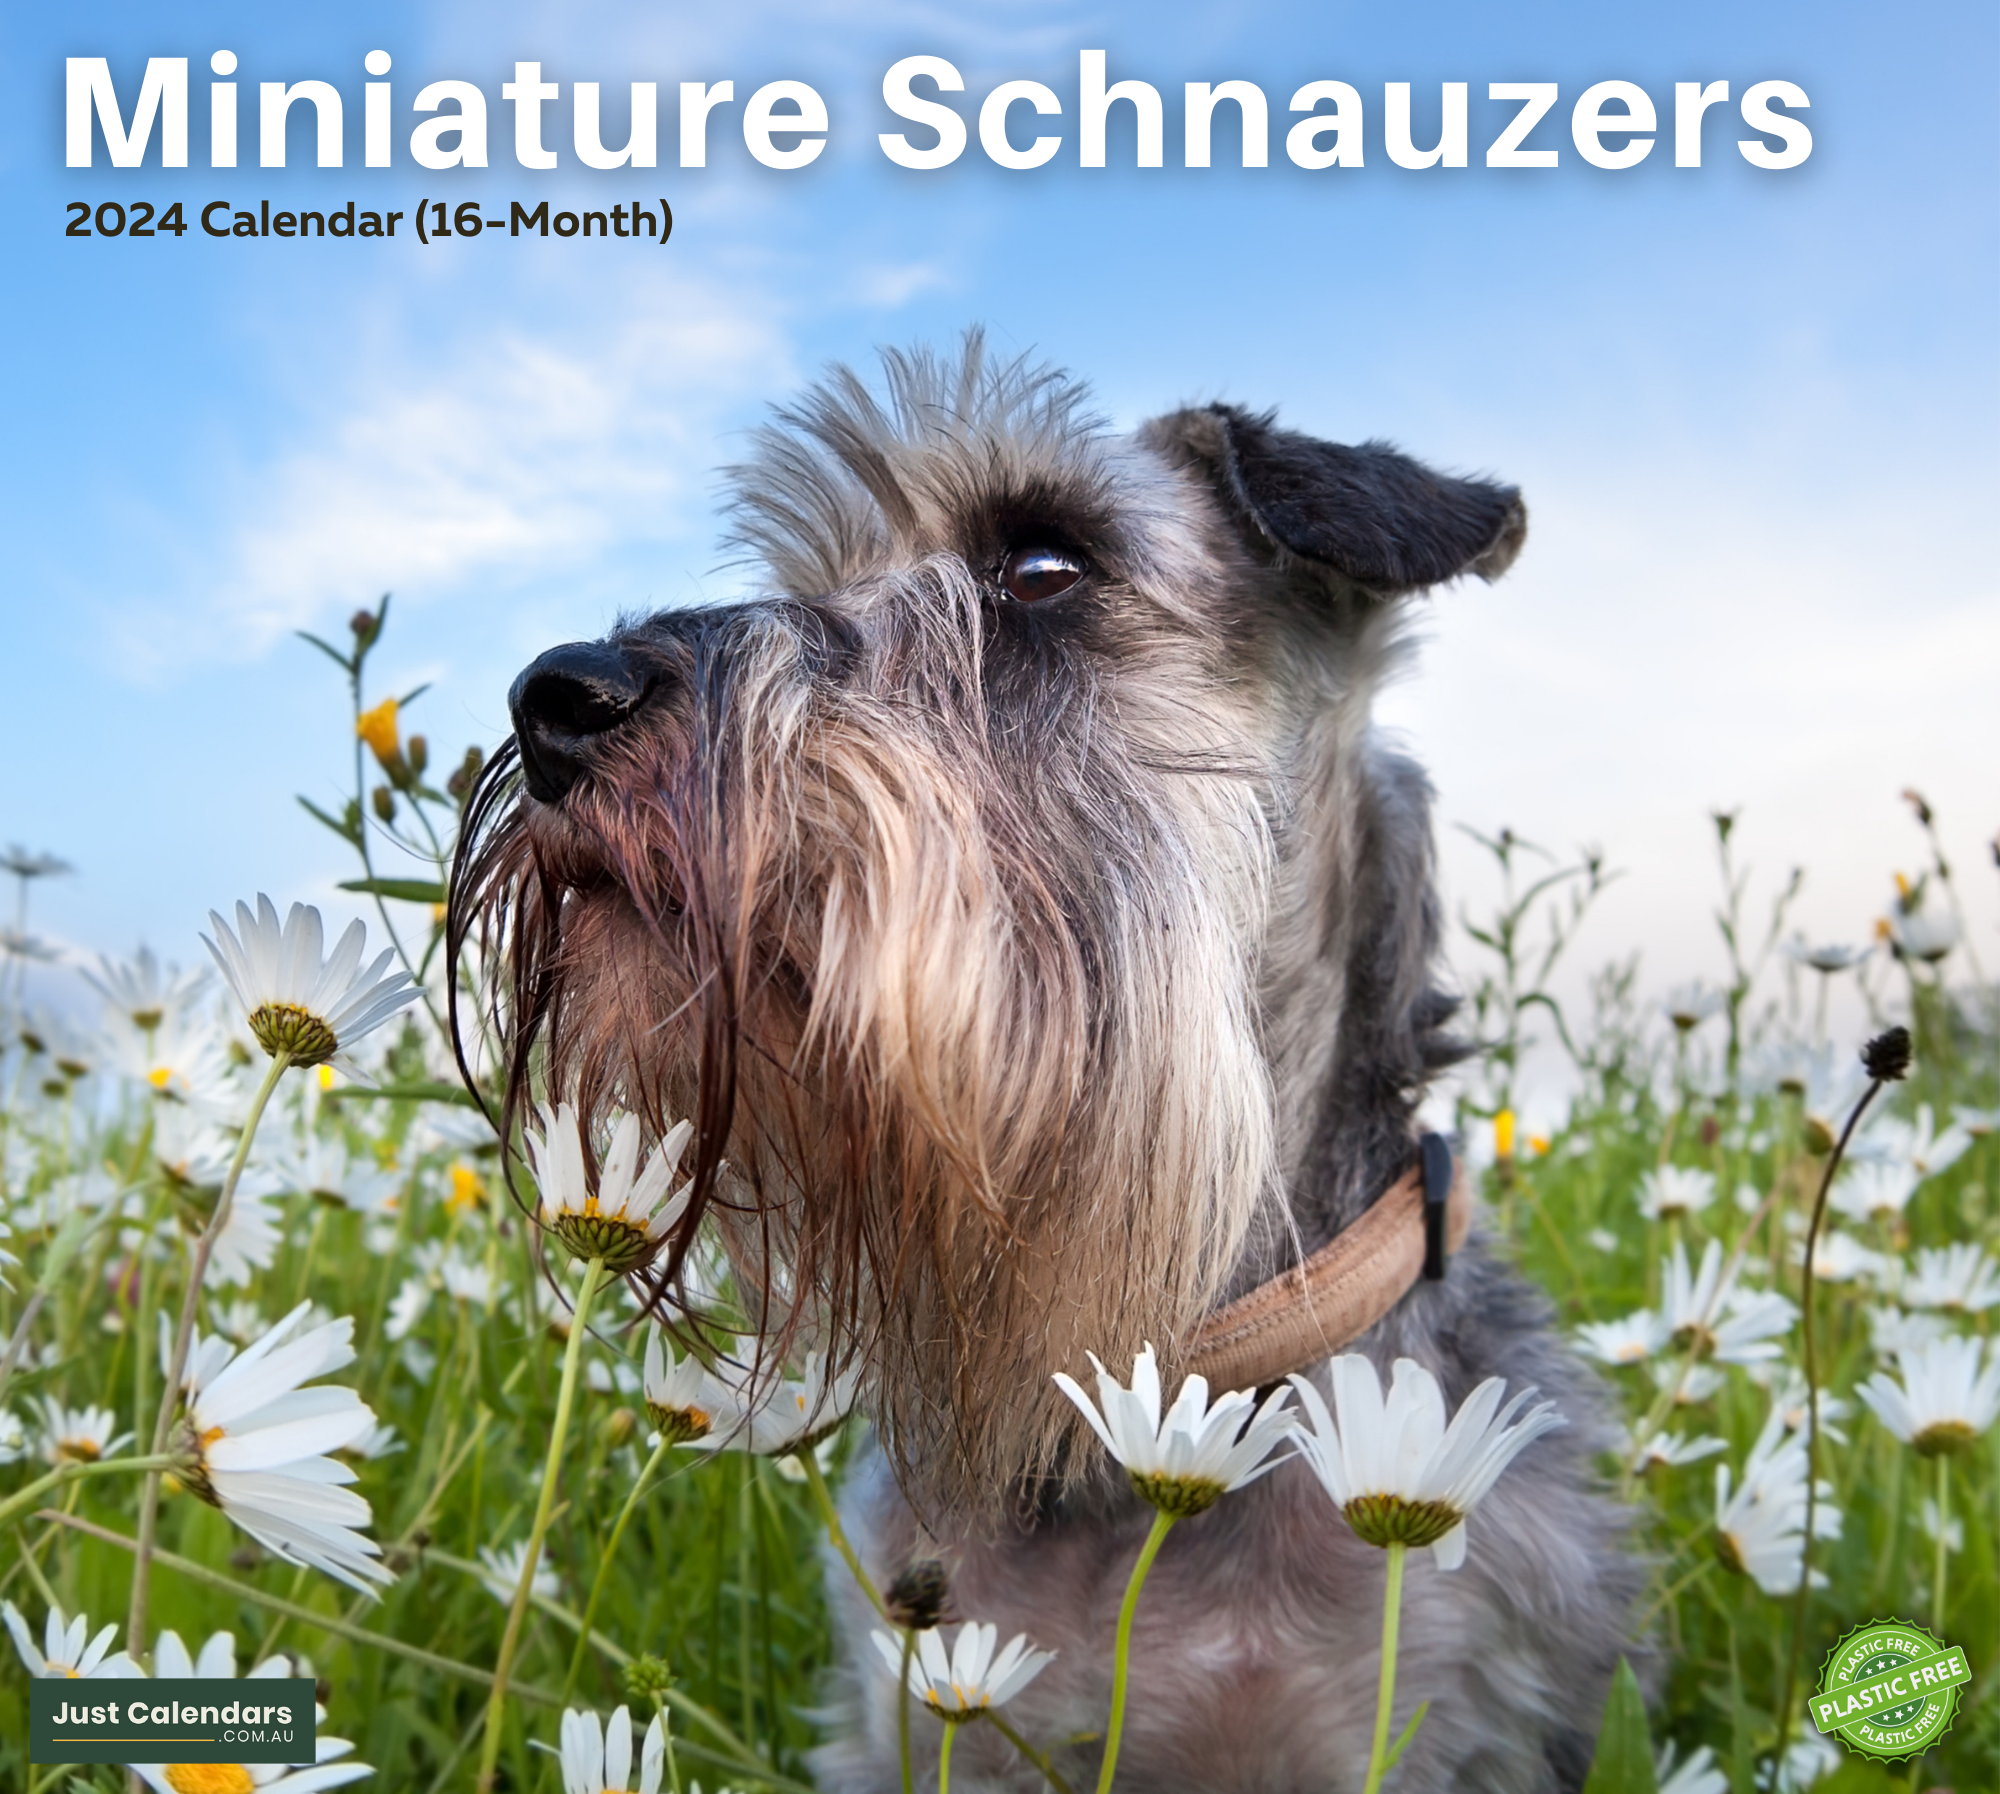 2024 Miniature Schnauzers Dogs & Puppies - Deluxe Wall Calendar by Just Calendars - 16 Month - Plastic Free